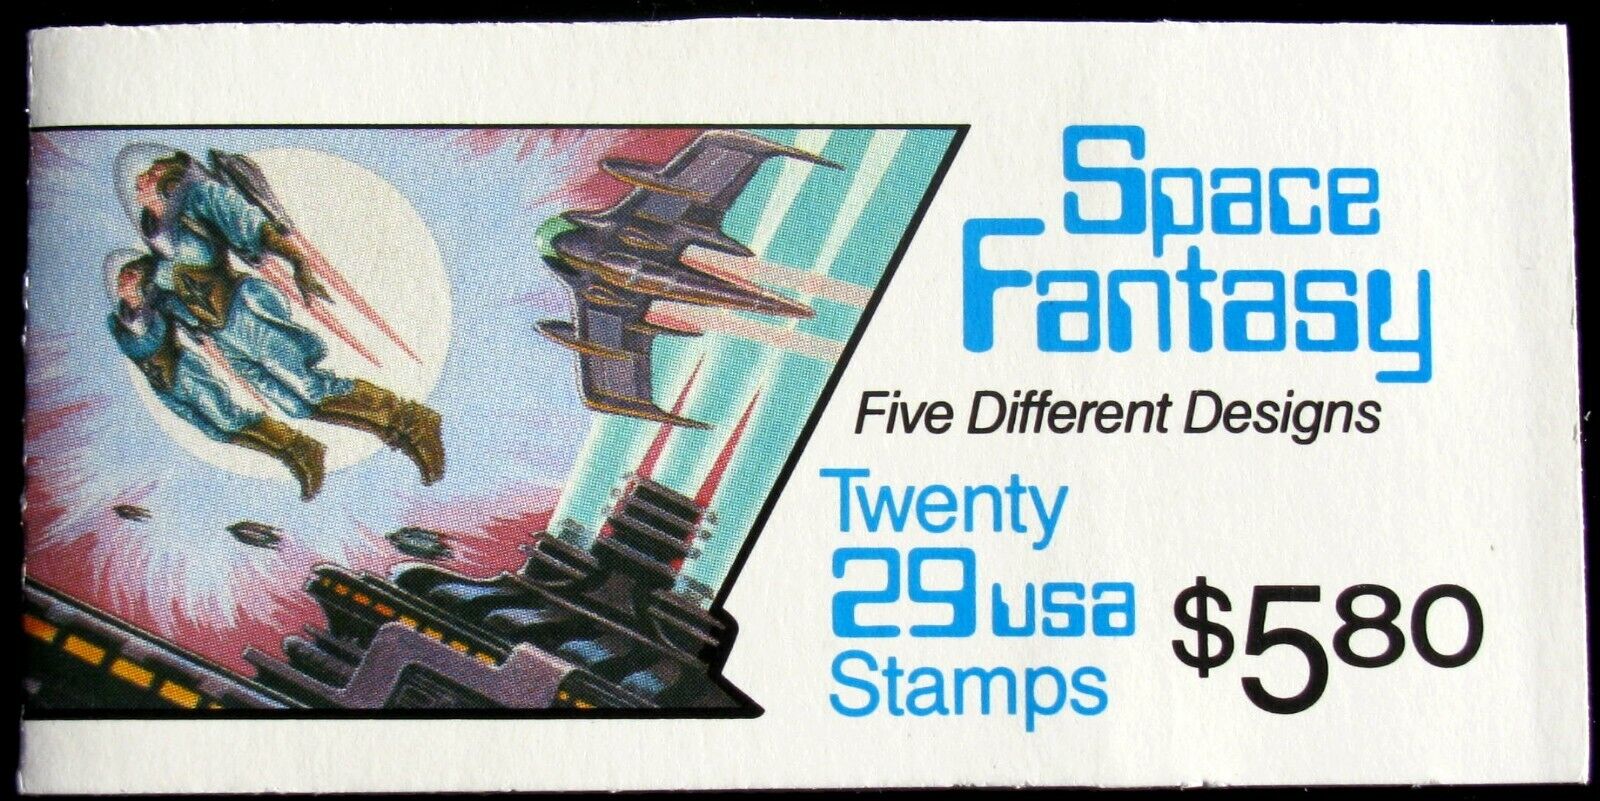 U.S. STAMP Online limited product San Diego Mall BOOKLET Sc #BK207